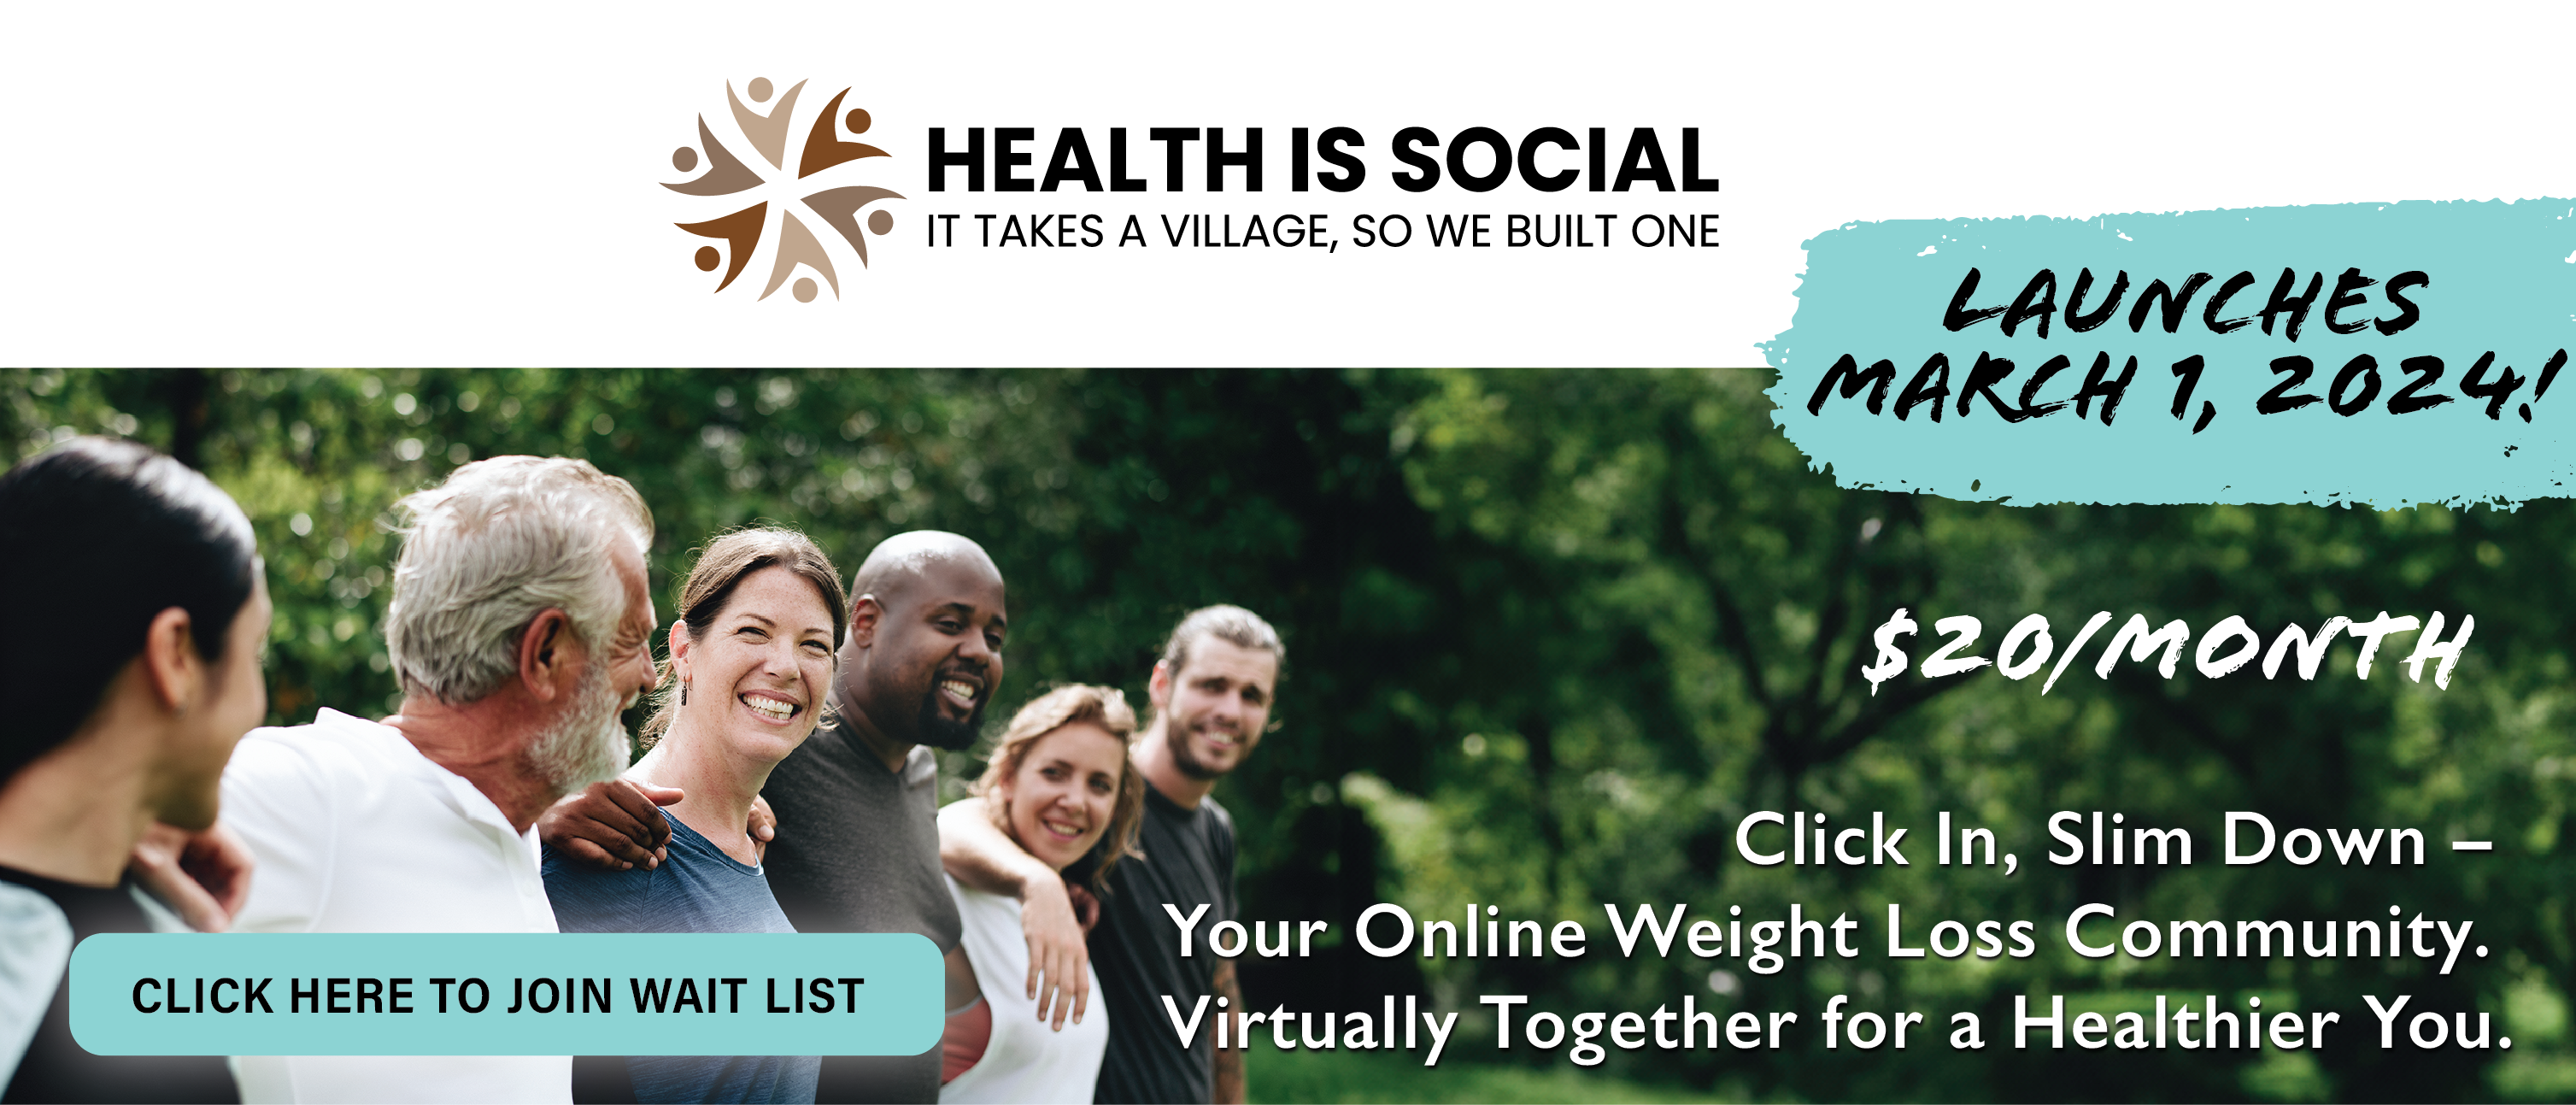 Health is Social. It takes a village, so we built one for you. This is your click in, slim down online weight loss community. We are virtually together for a healthier you! Click to join the waiting list for a March 1, 2024 launch!